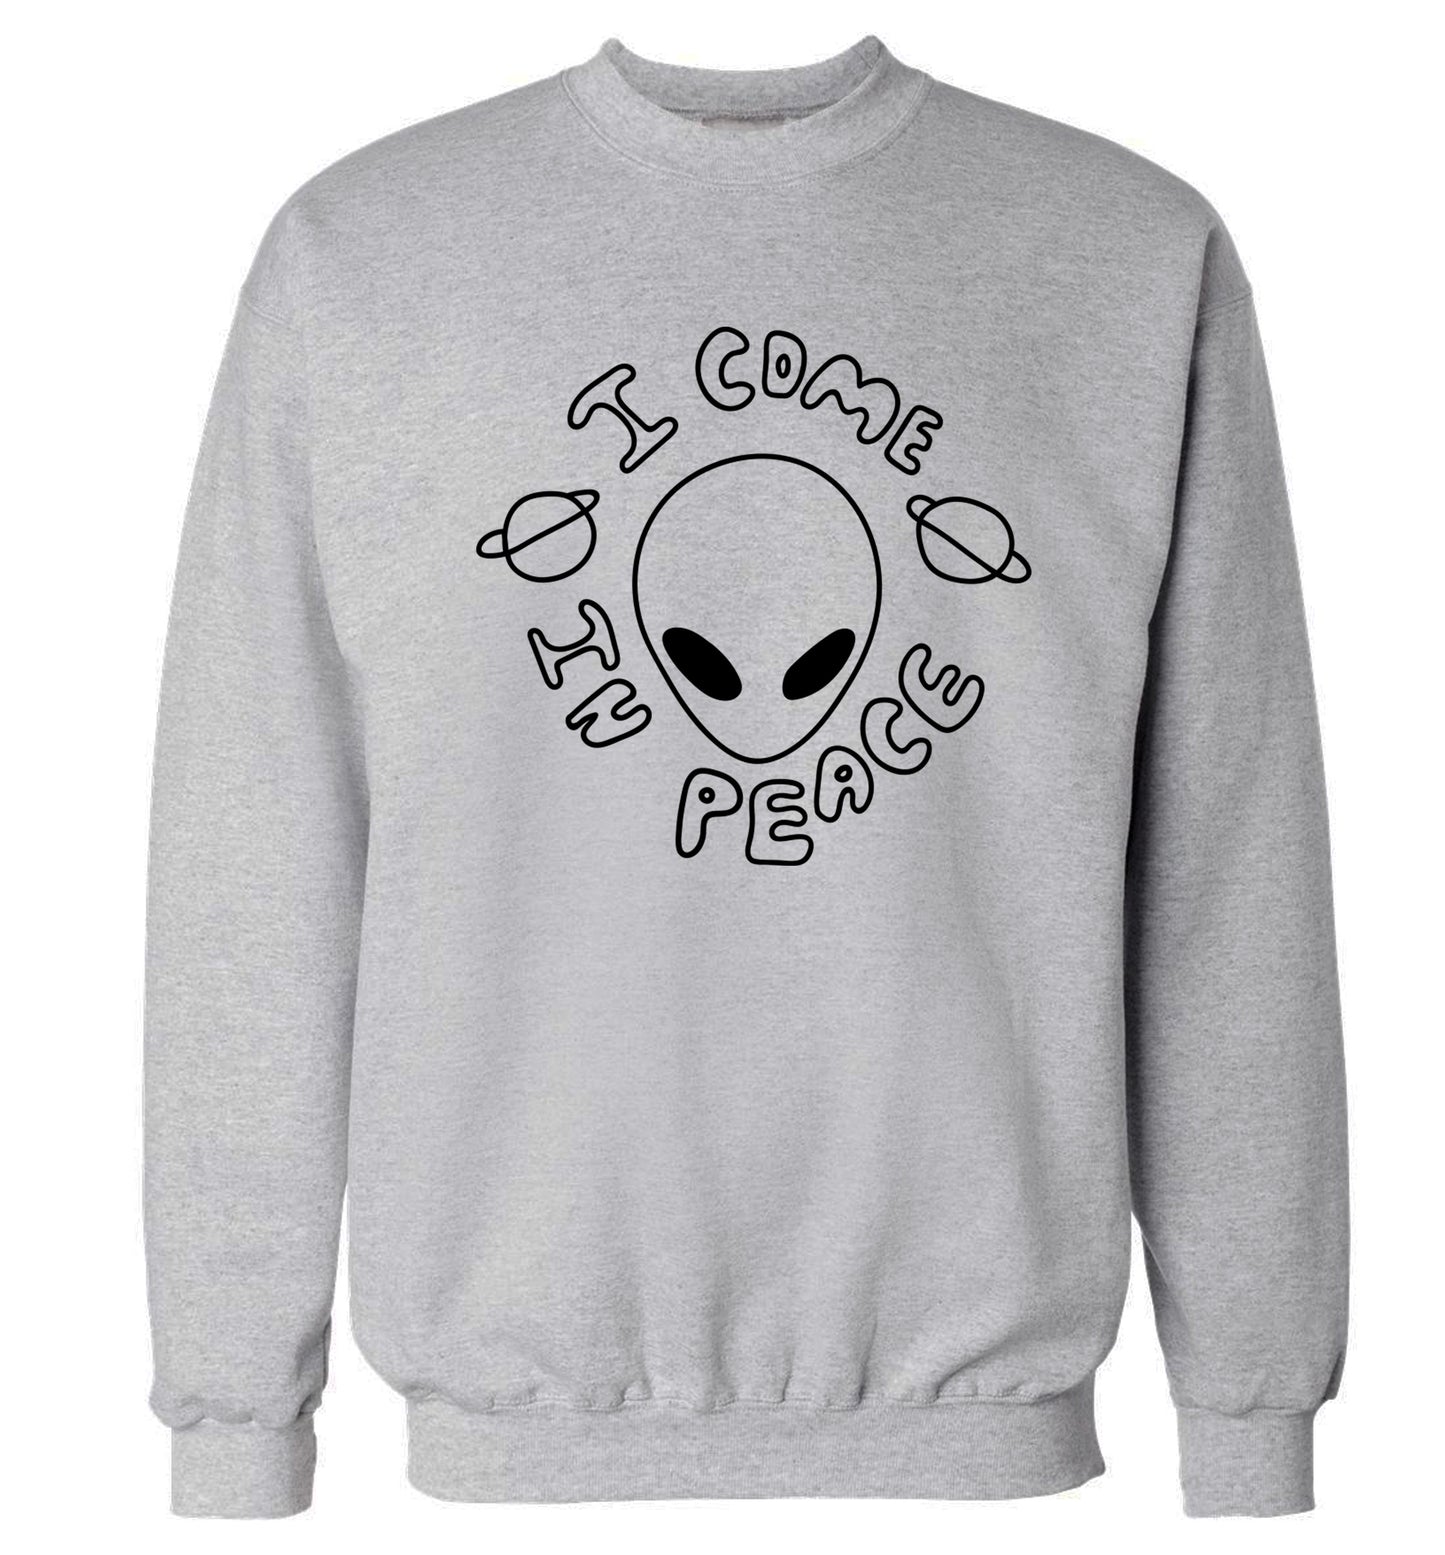 I come in peace Adult's unisex grey Sweater 2XL